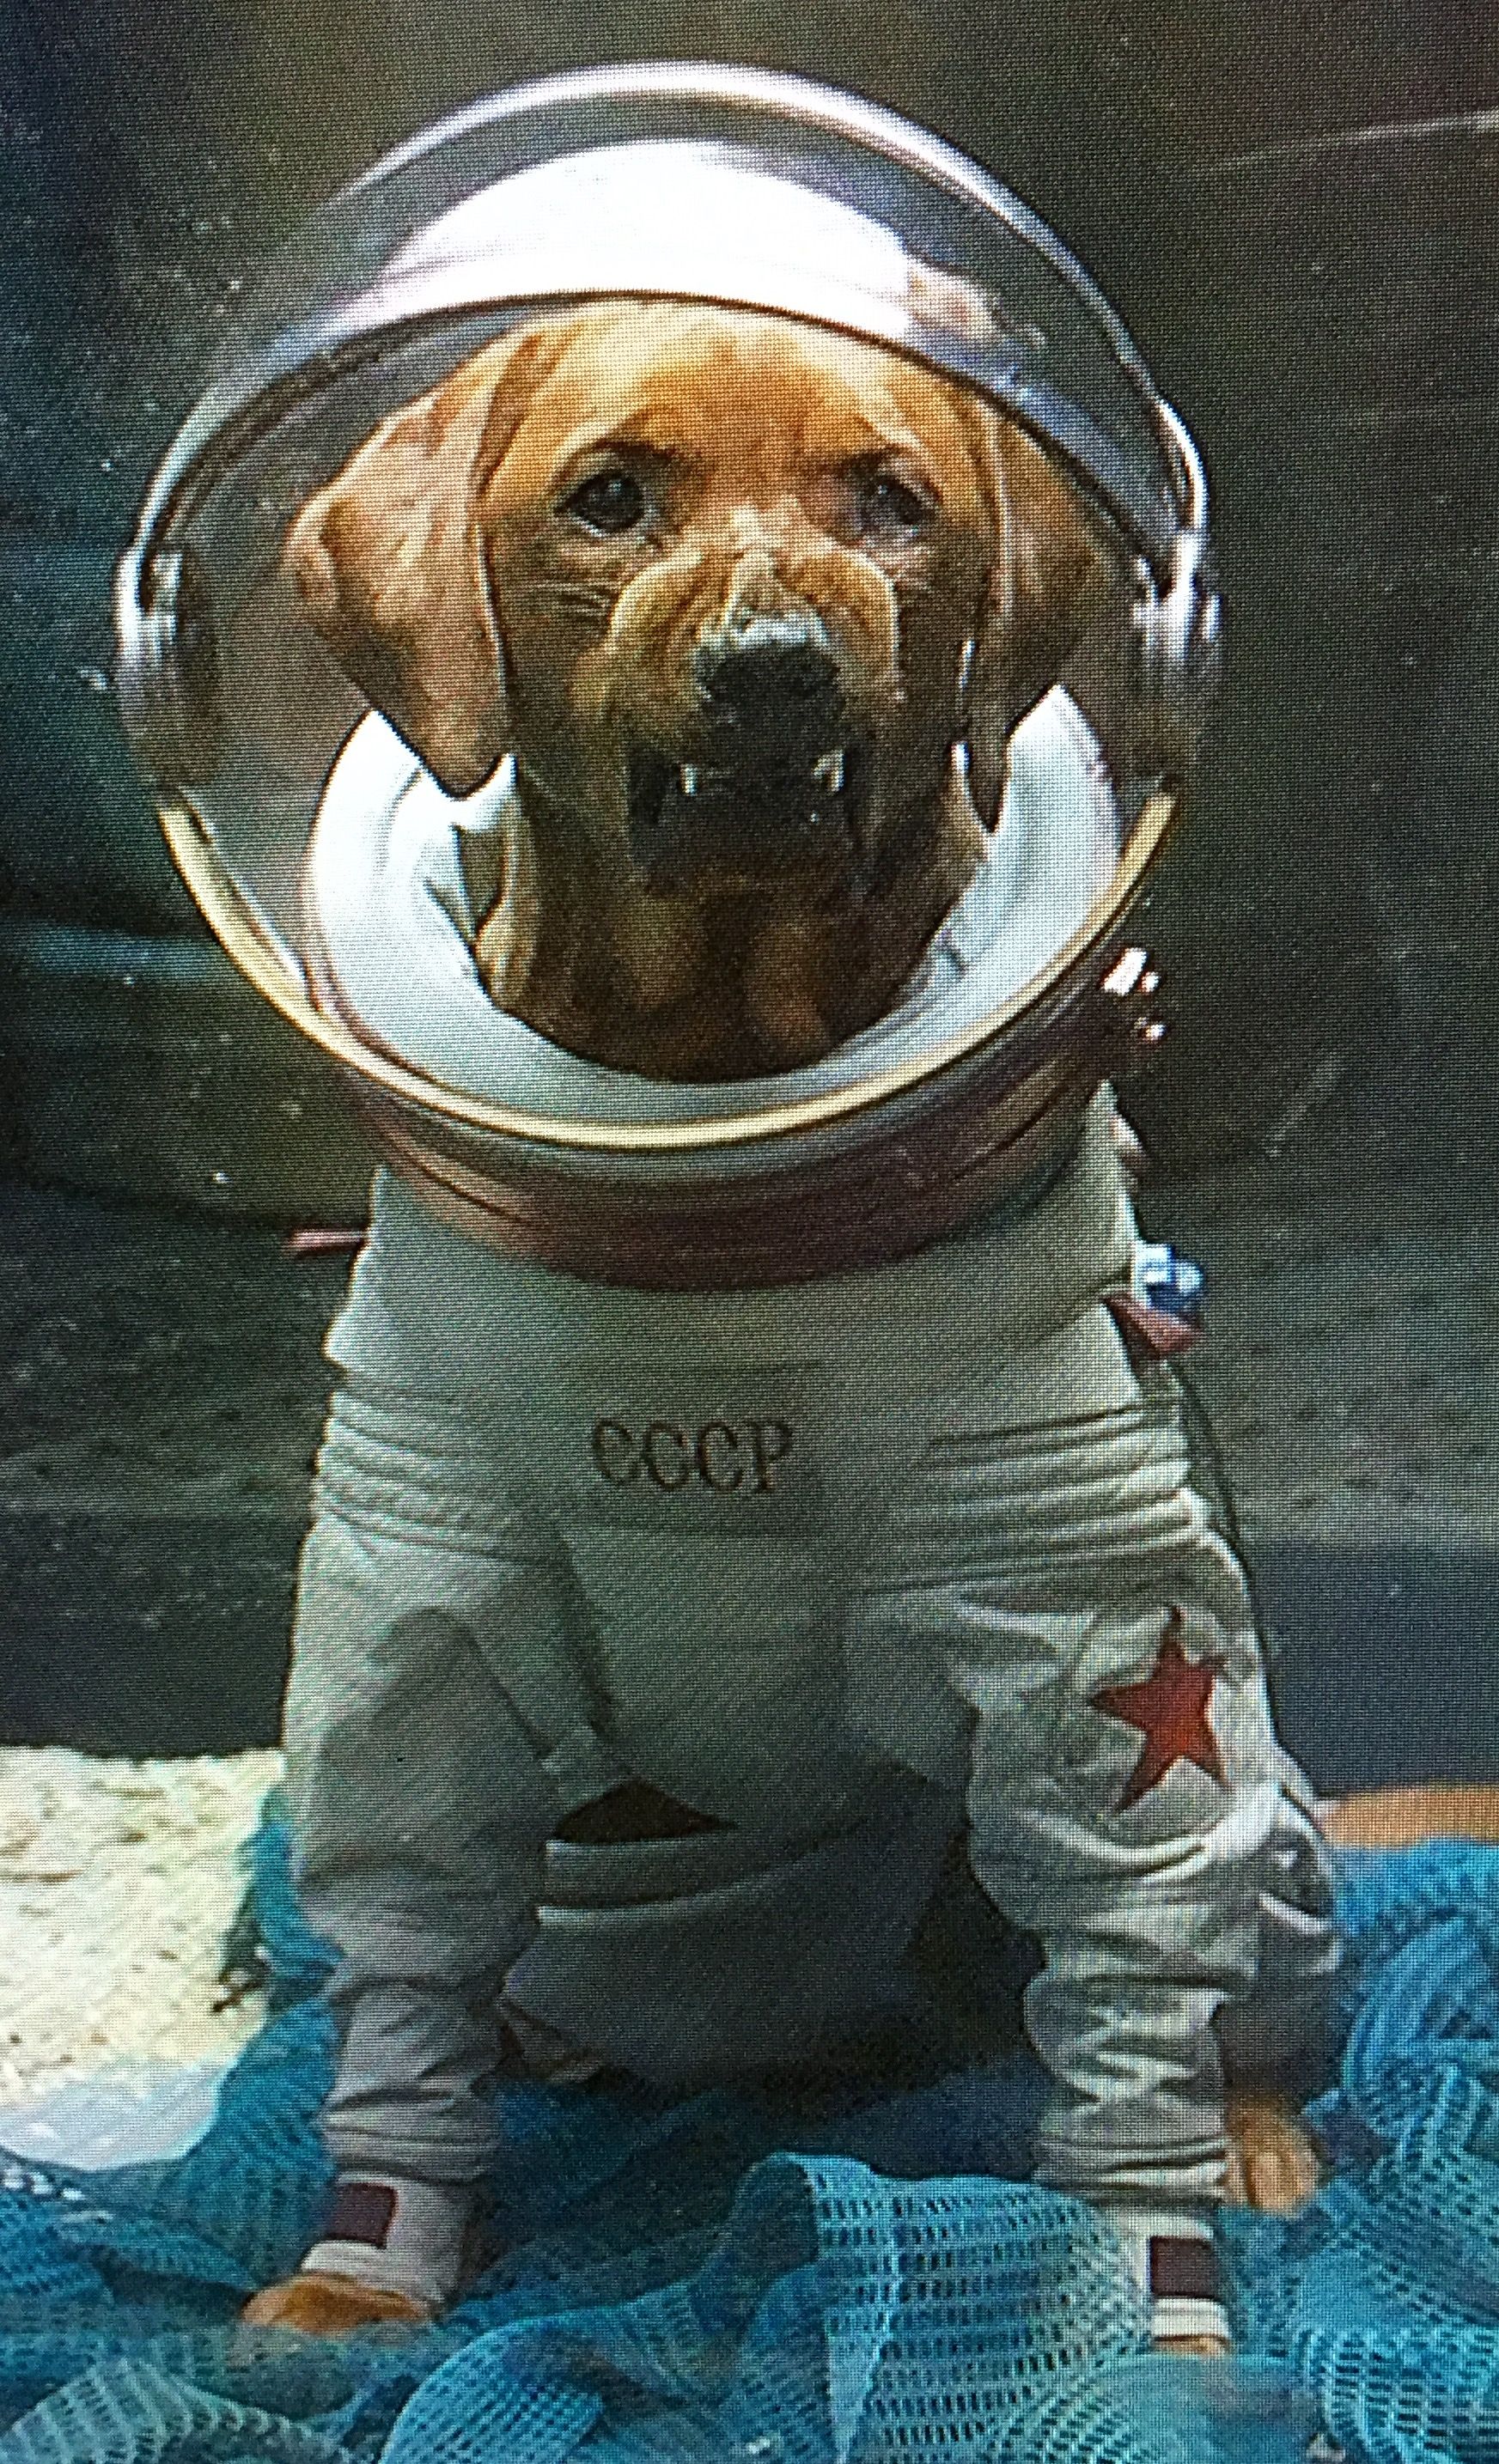 Cosmo the Spacedog. Introduced in the 2014 film Guardians